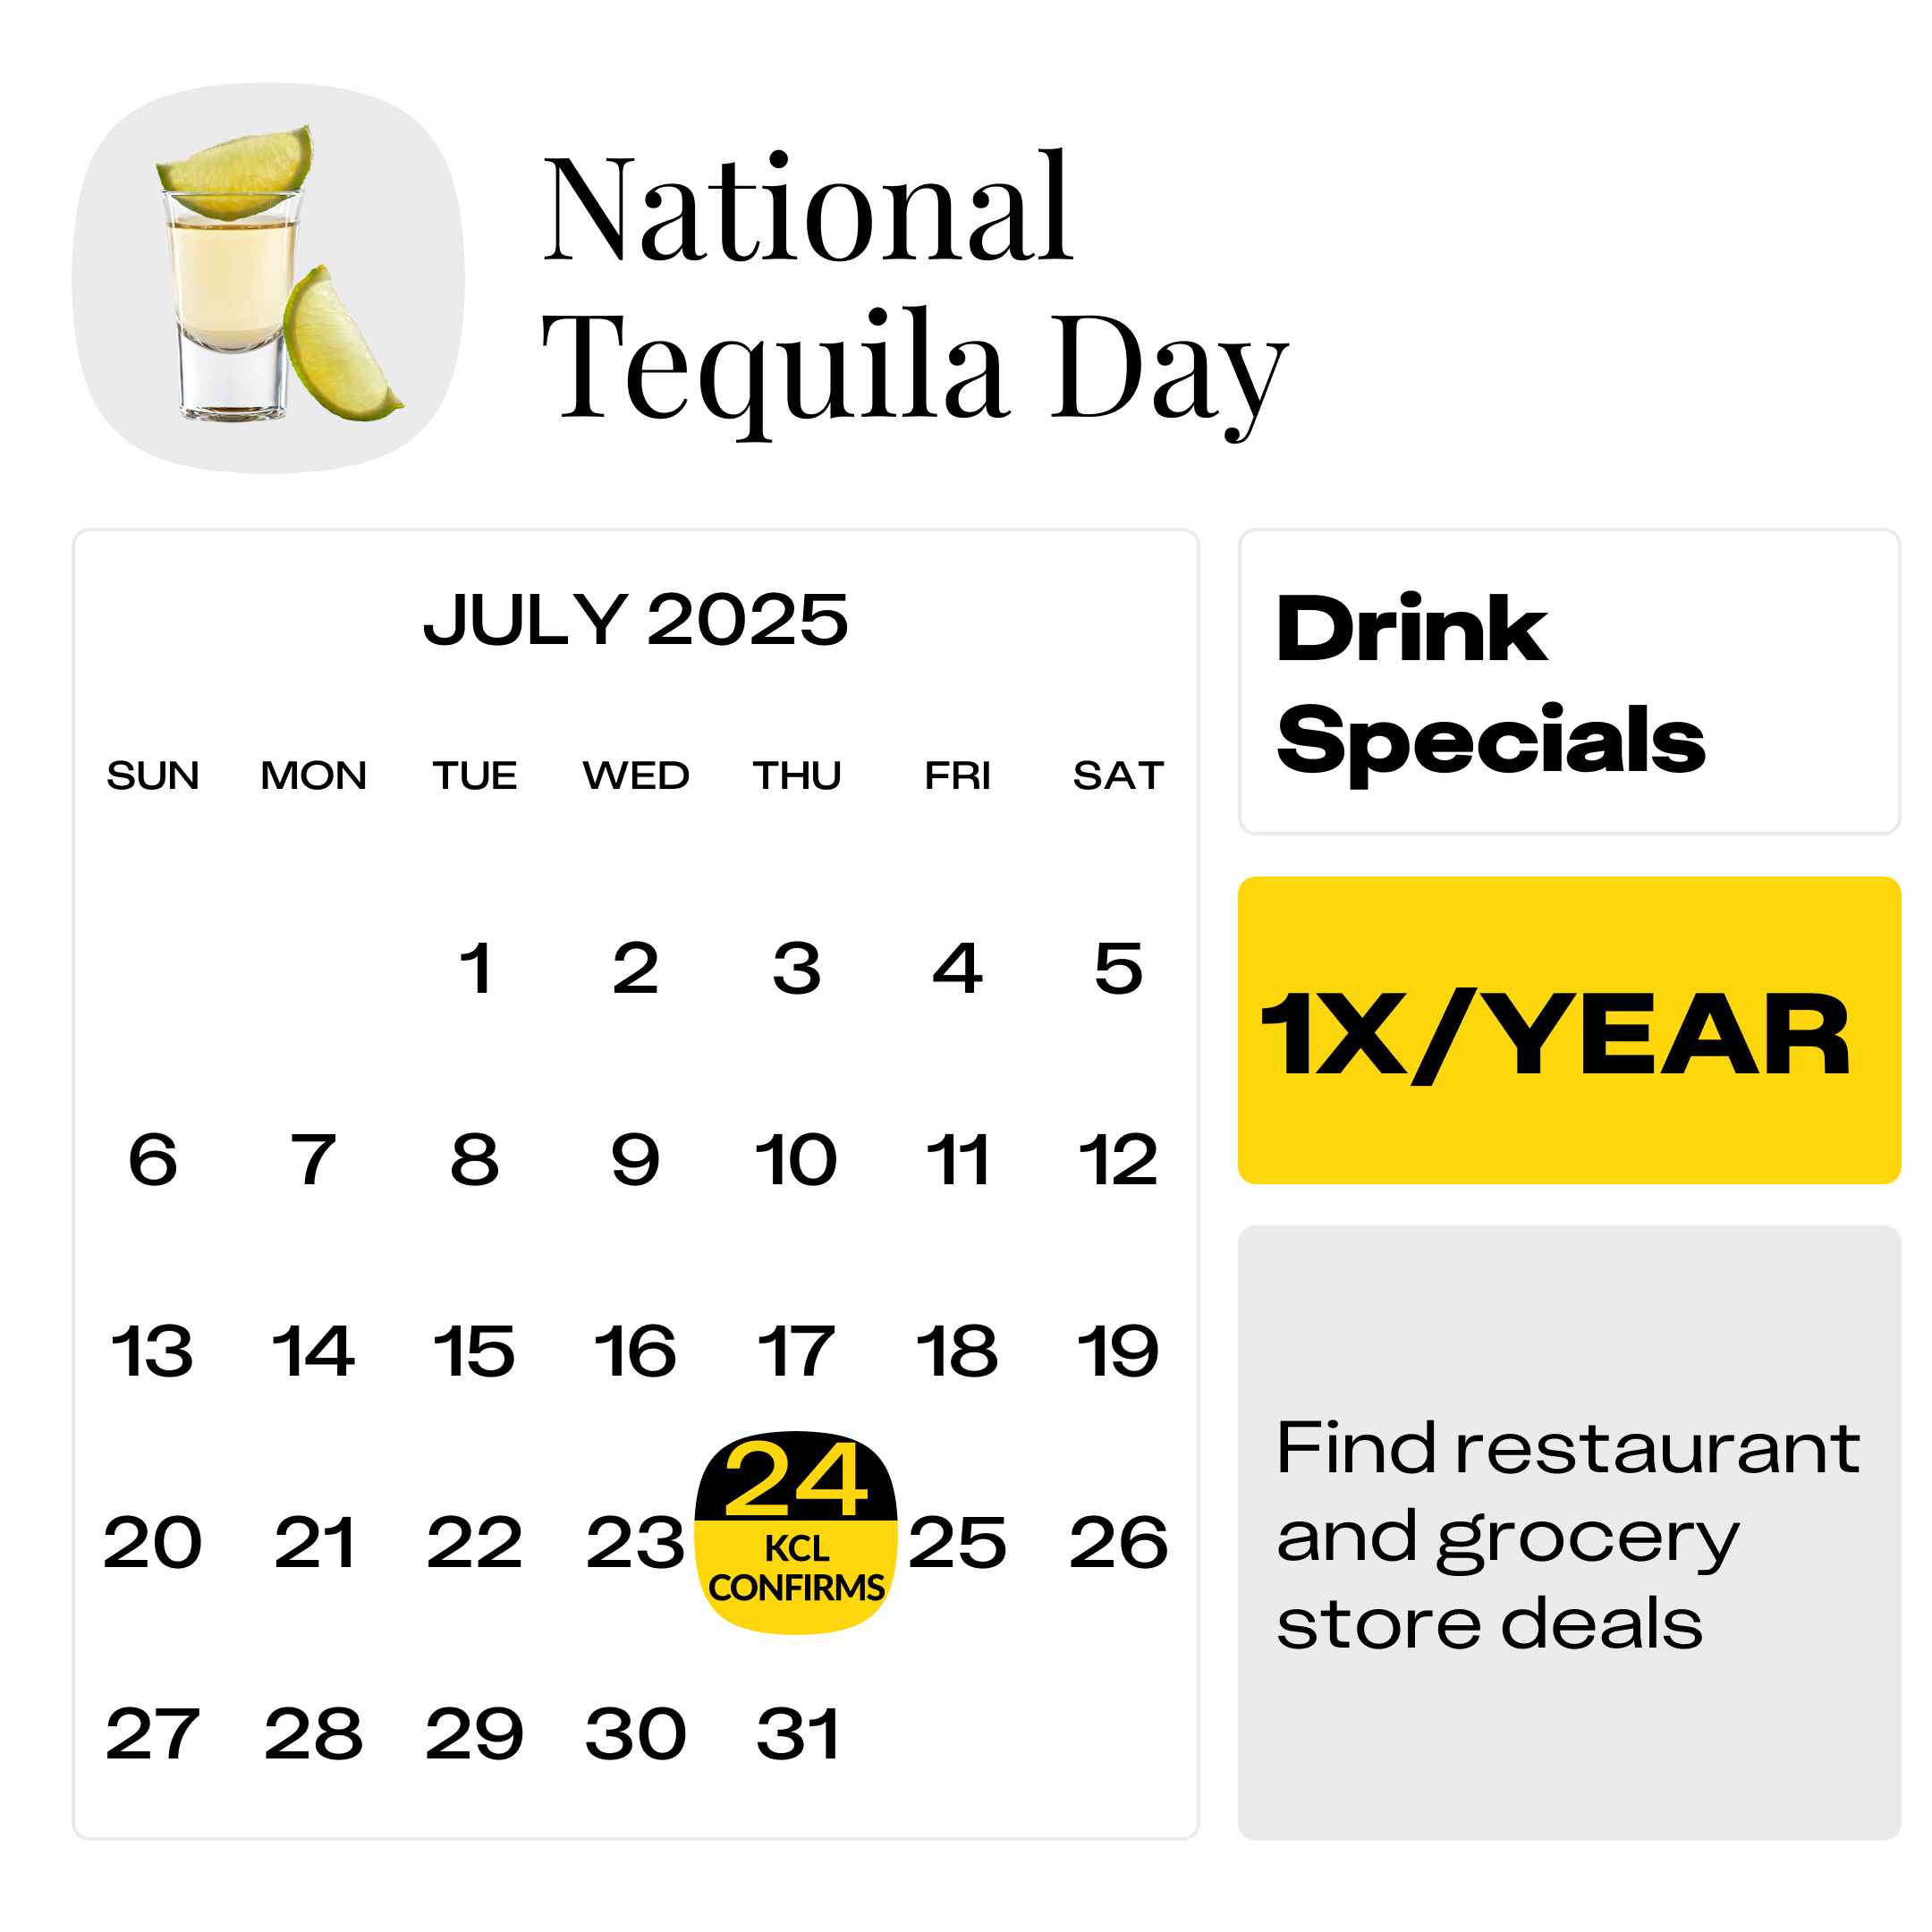 National-Tequila-Day-2025